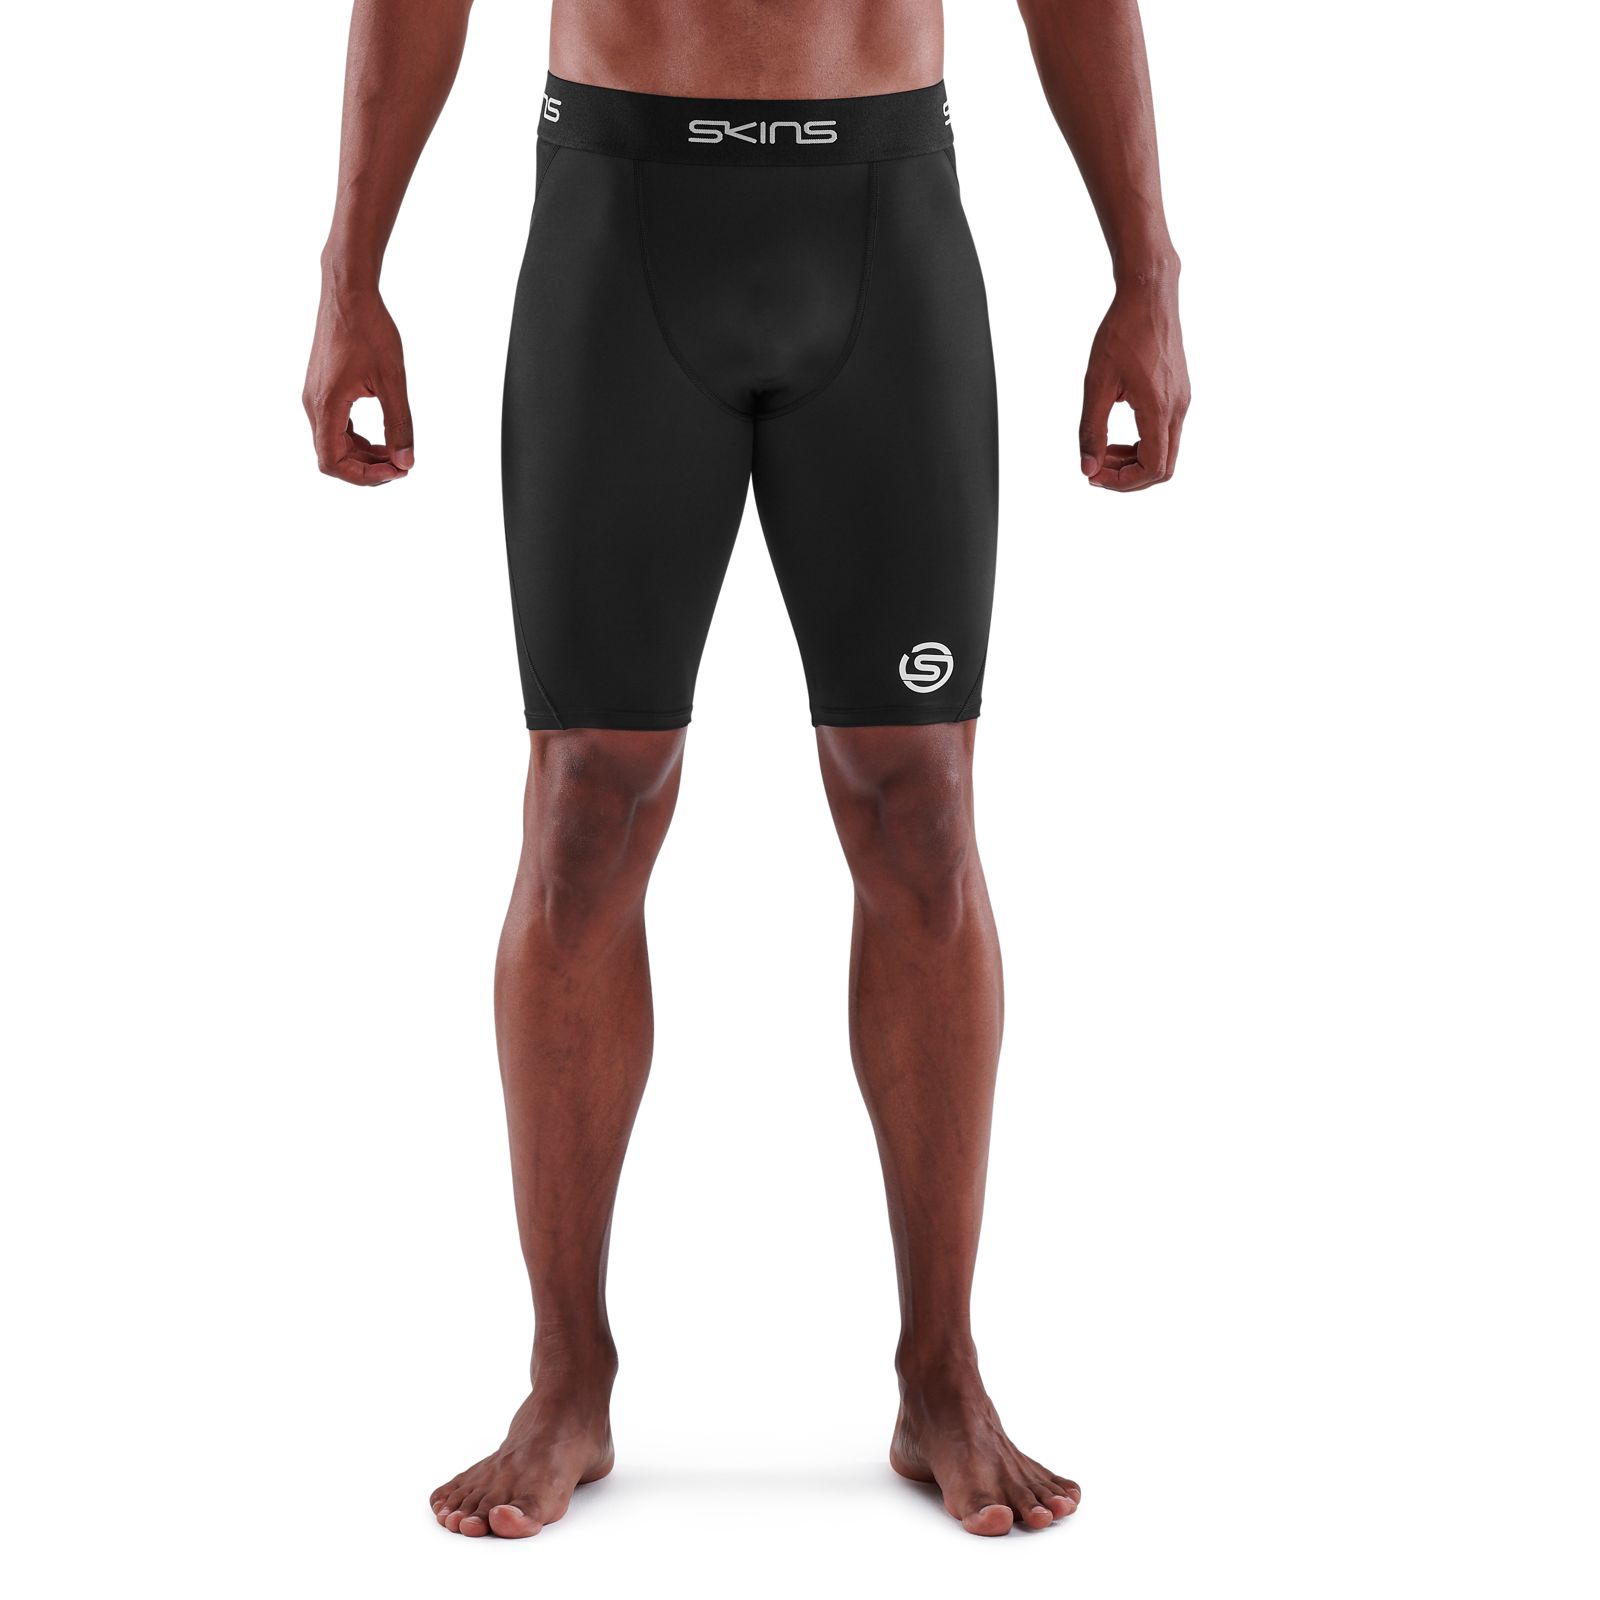 SKINS SERIES-1 YOUTH LONG TIGHTS BLACK - SKINS Compression USA